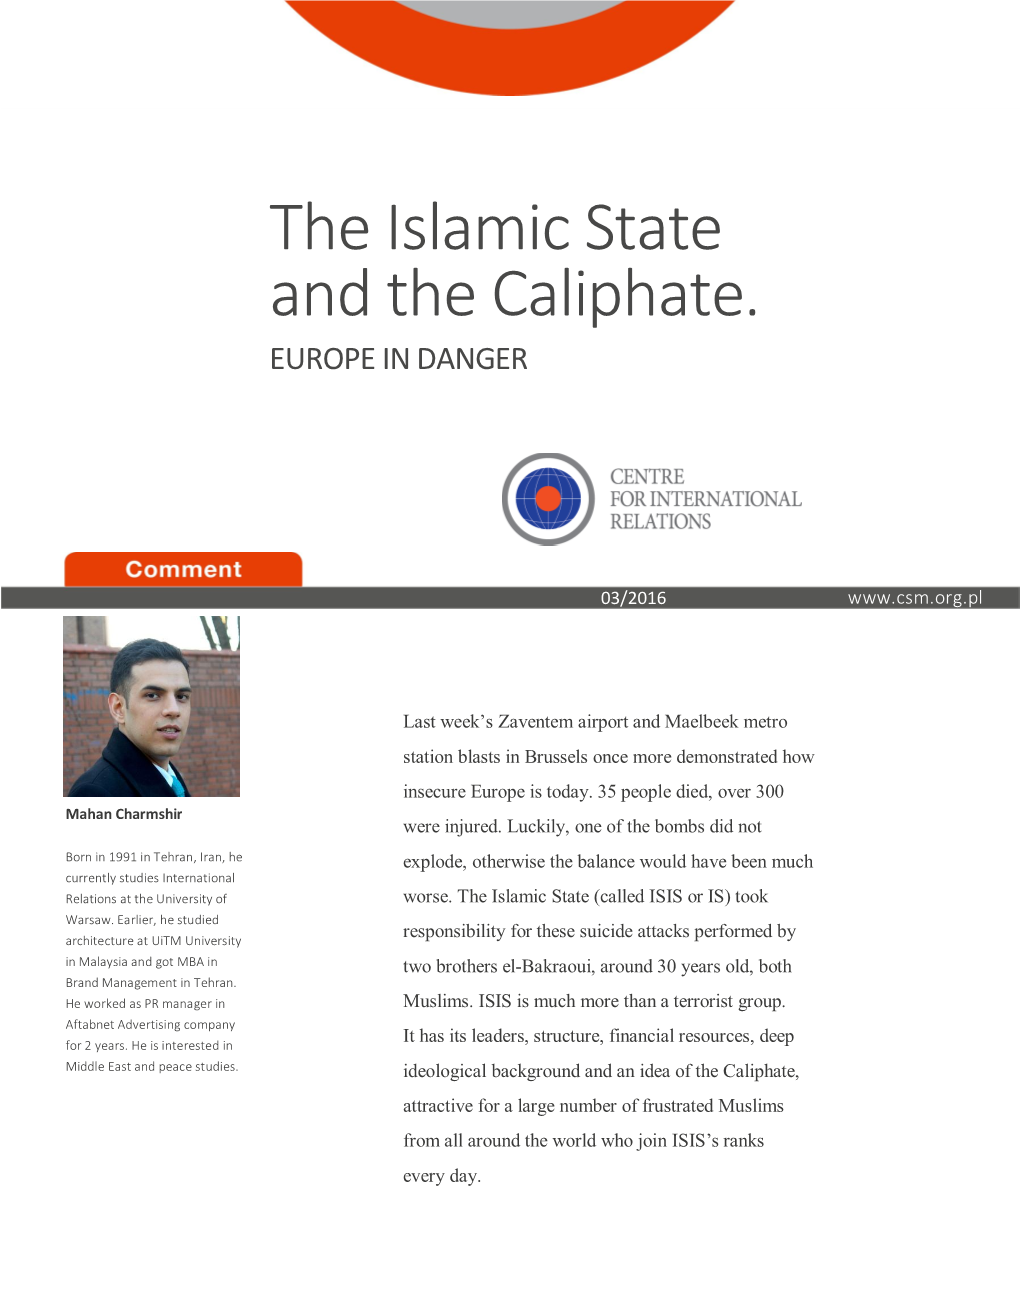 The Islamic State and the Caliphate. EUROPE in DANGER